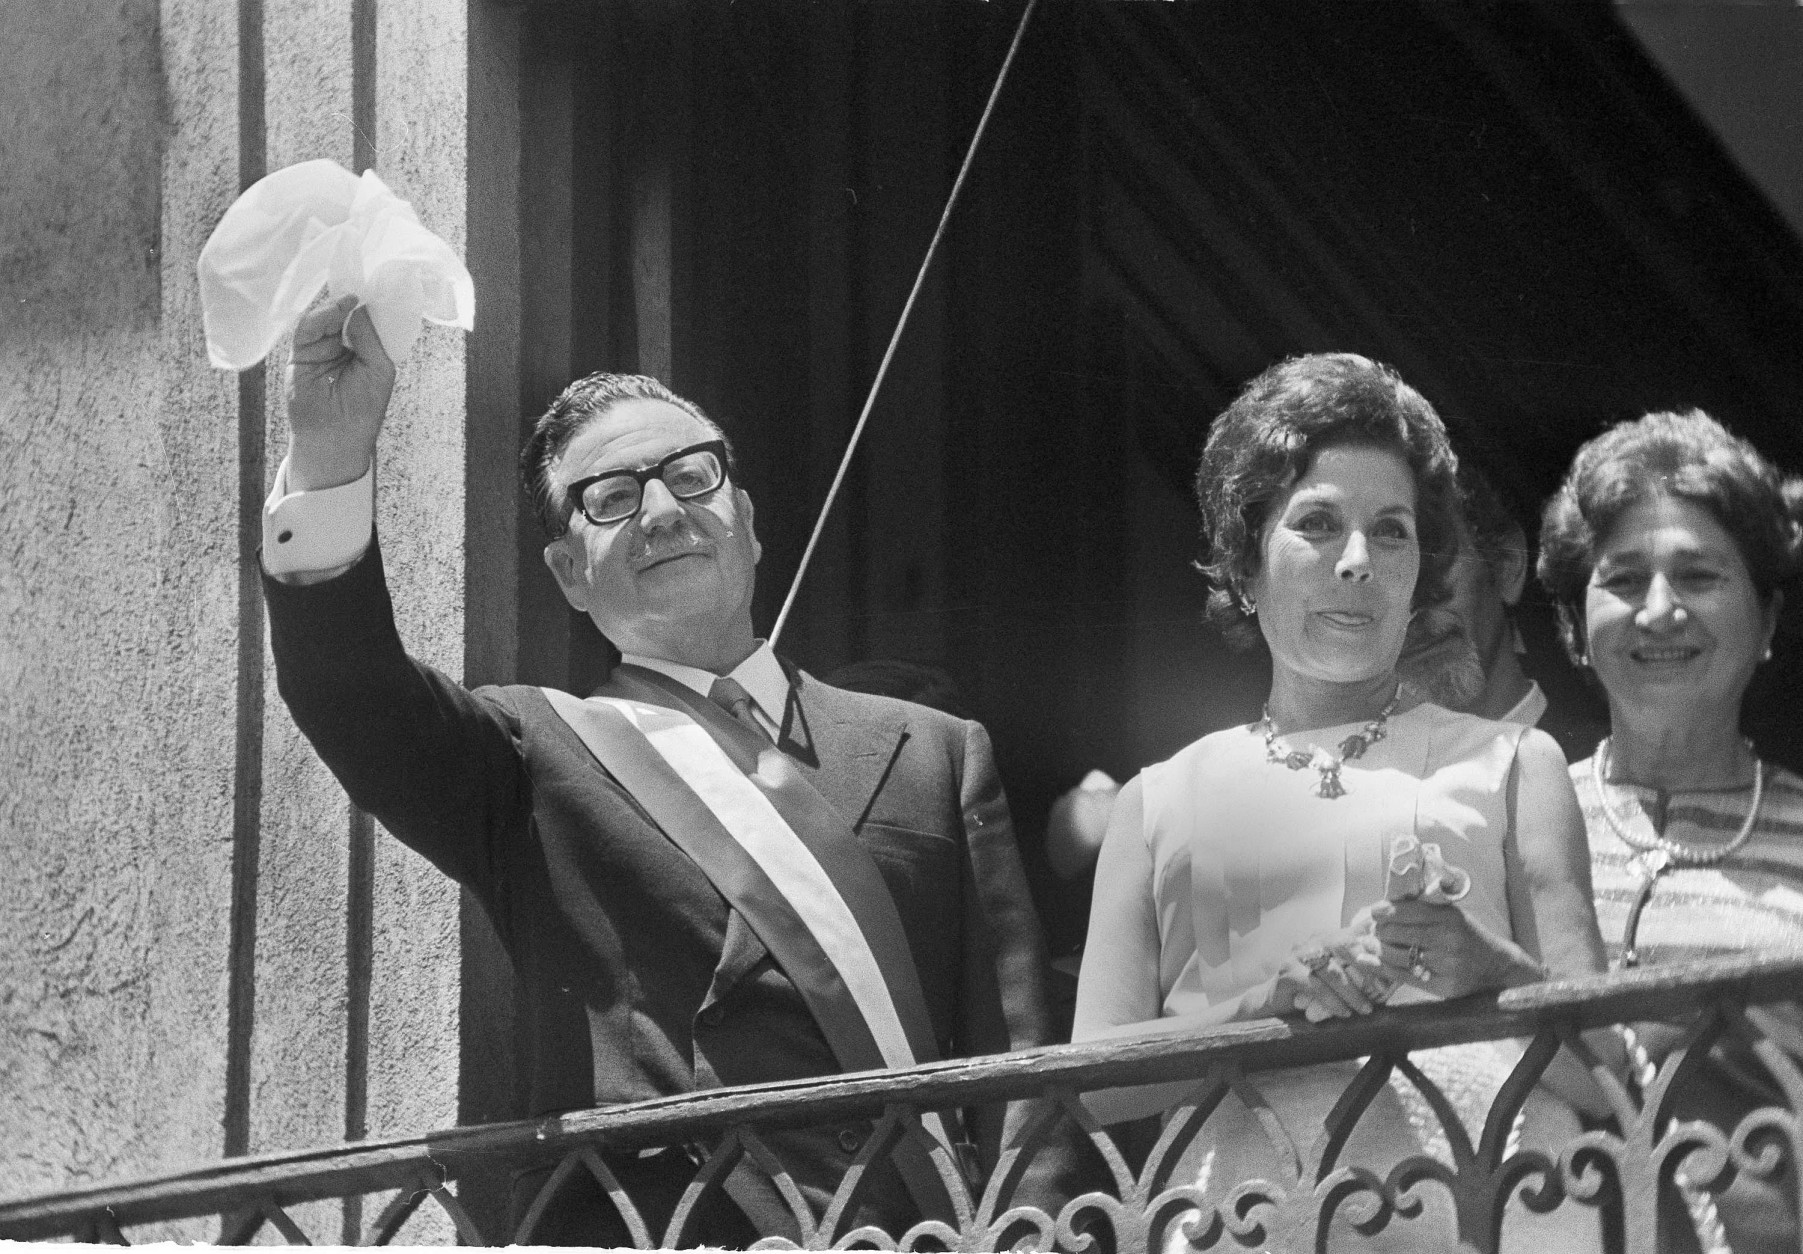 Newly inaugurated Chilean President Salvador Allende waves a handkerchief from the balcony of the government house in Santiago, Nov. 2, 1970 as he and his wife Hortensia Bussi celebrate.  Others are unidentified.  (AP Photo)